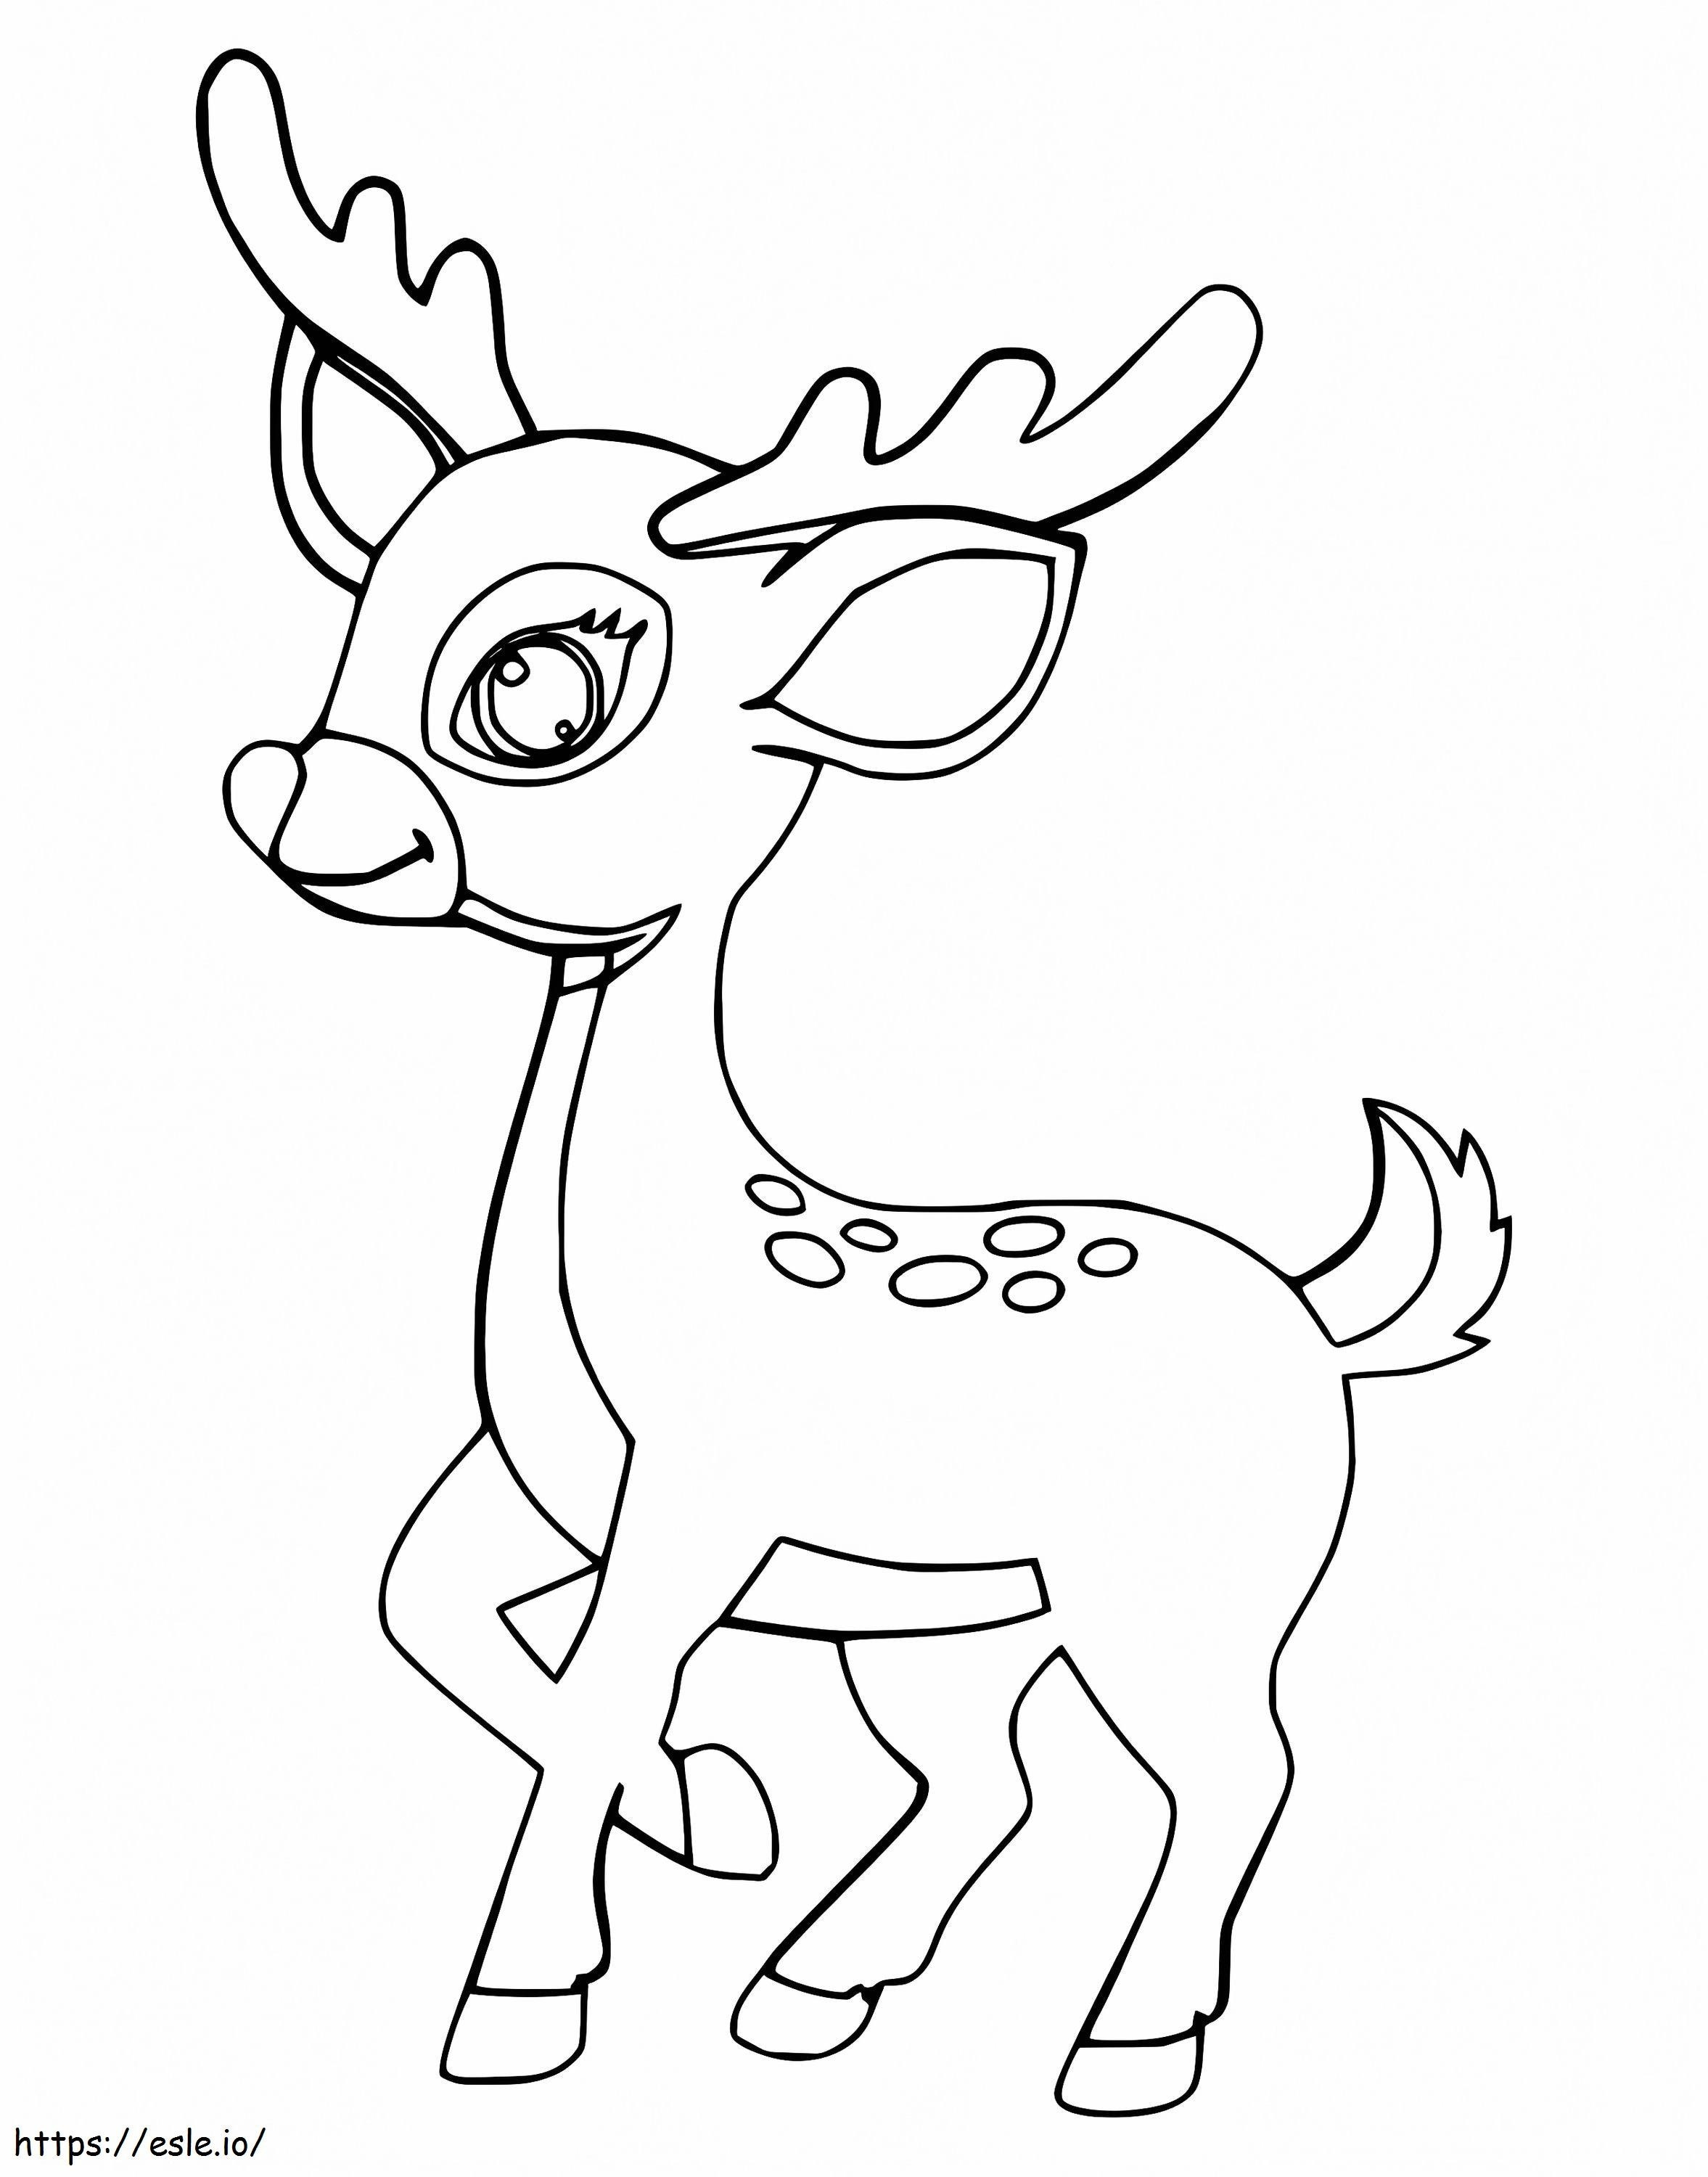 Lovely Fawn coloring page